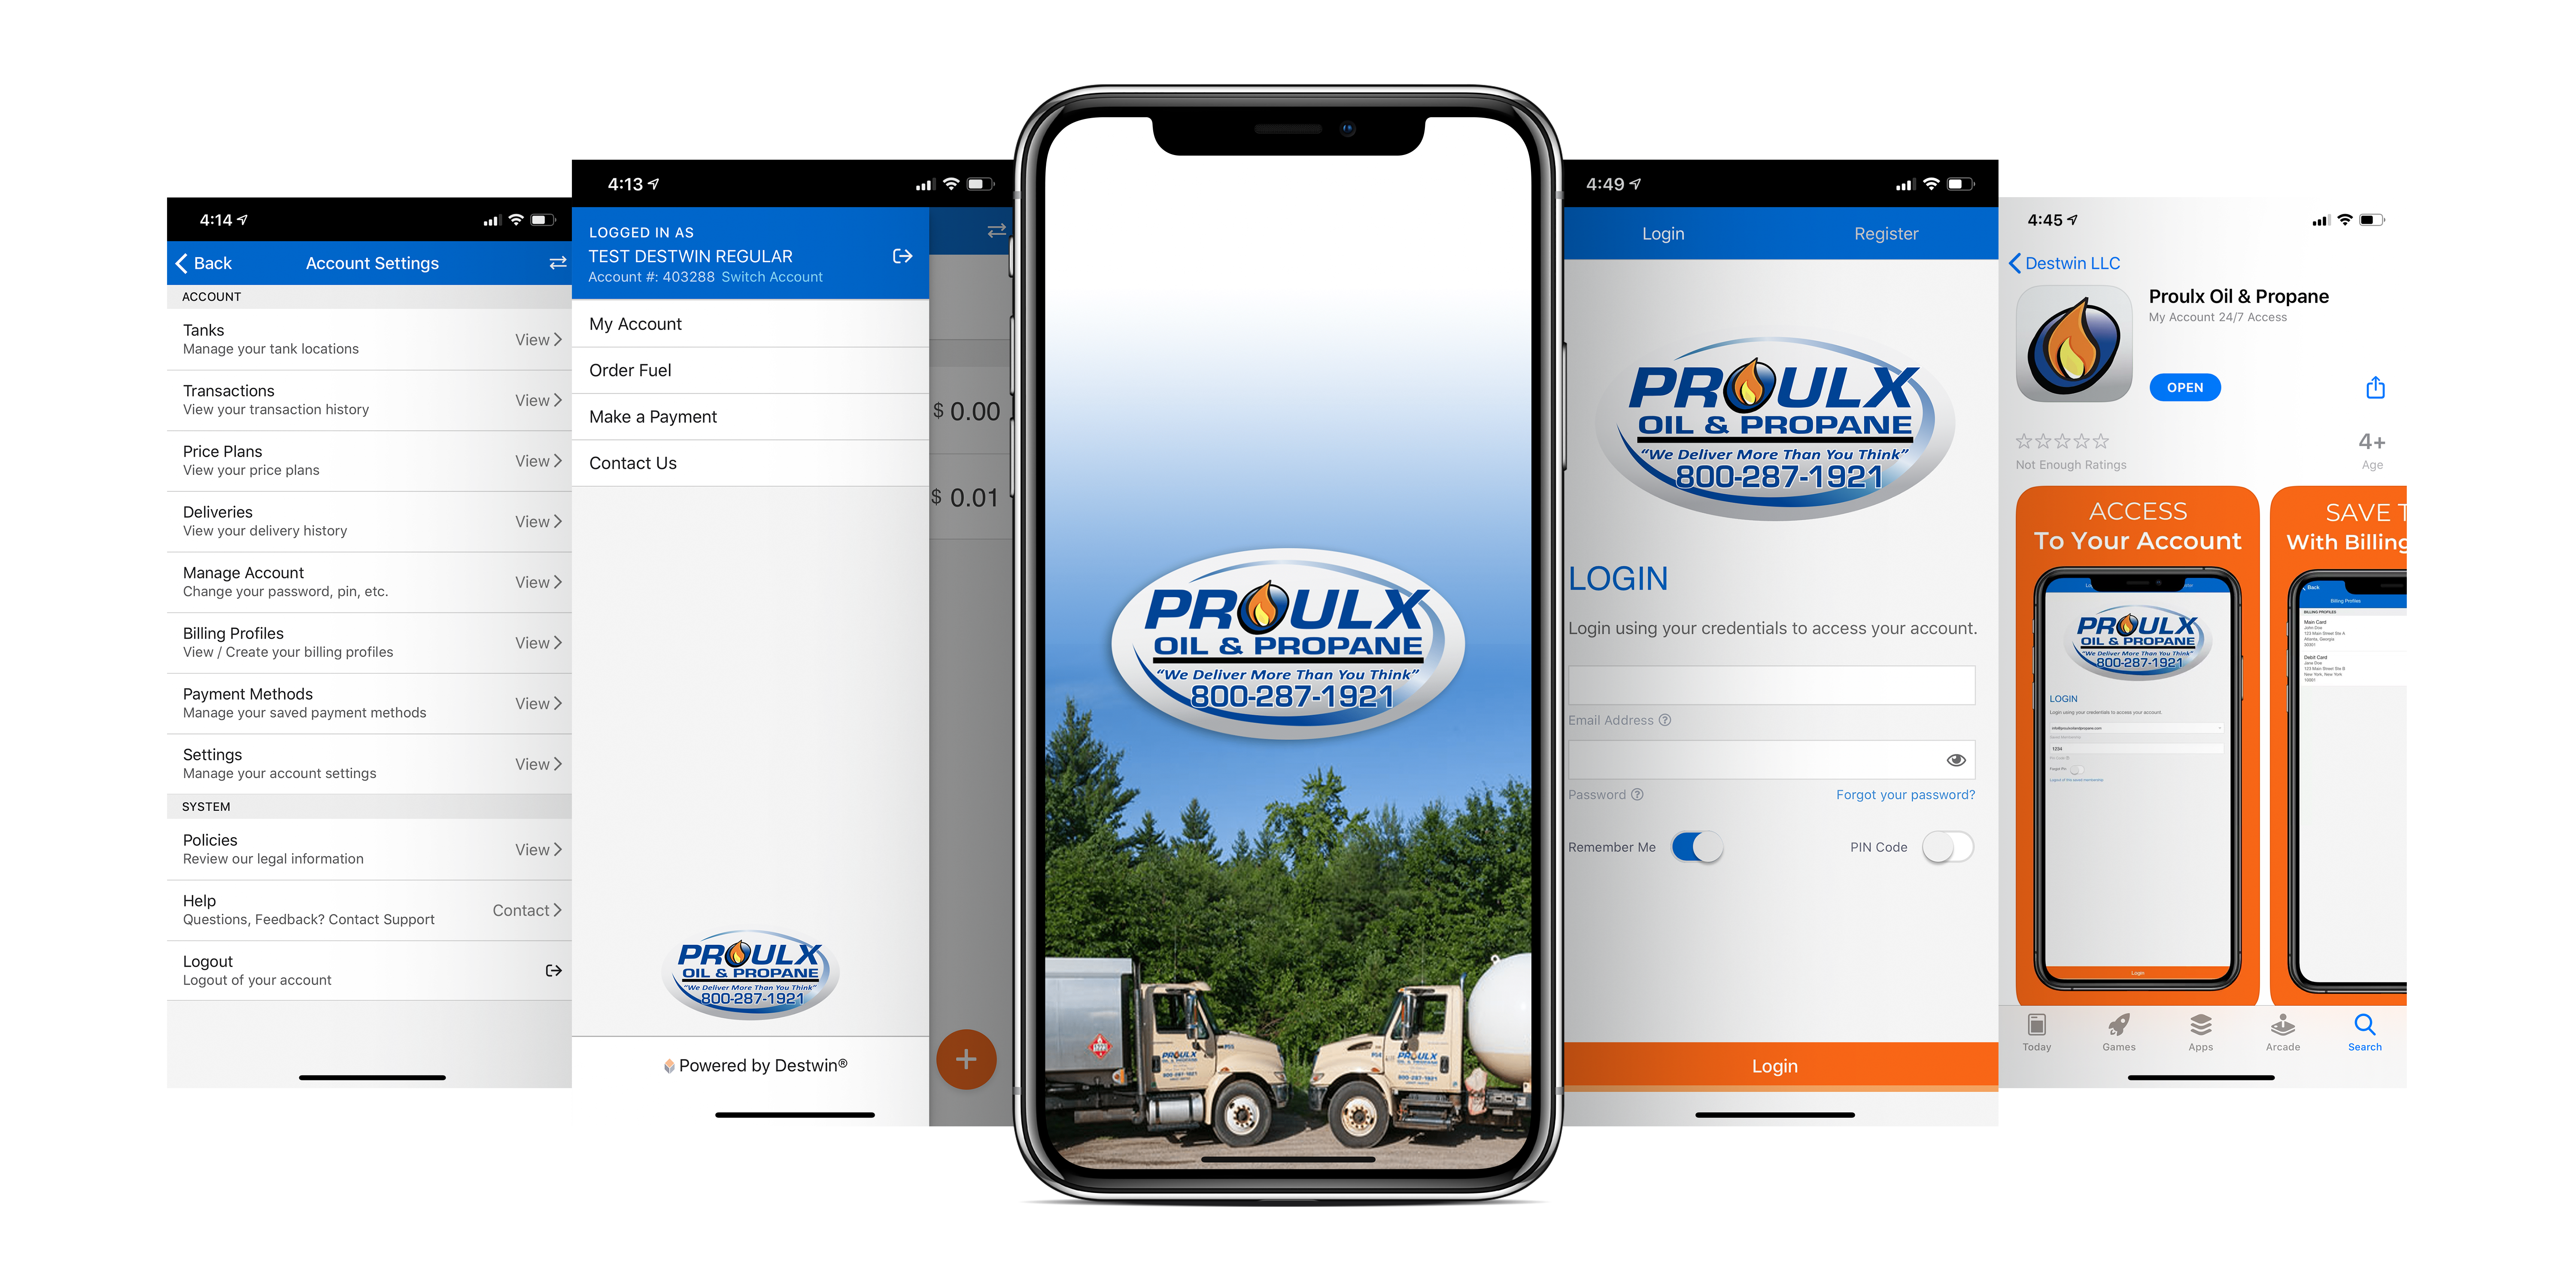 proulx oil and propane rolls out new Mobile App for LPG customers reports BPN the propane industry's leading voice since 1939